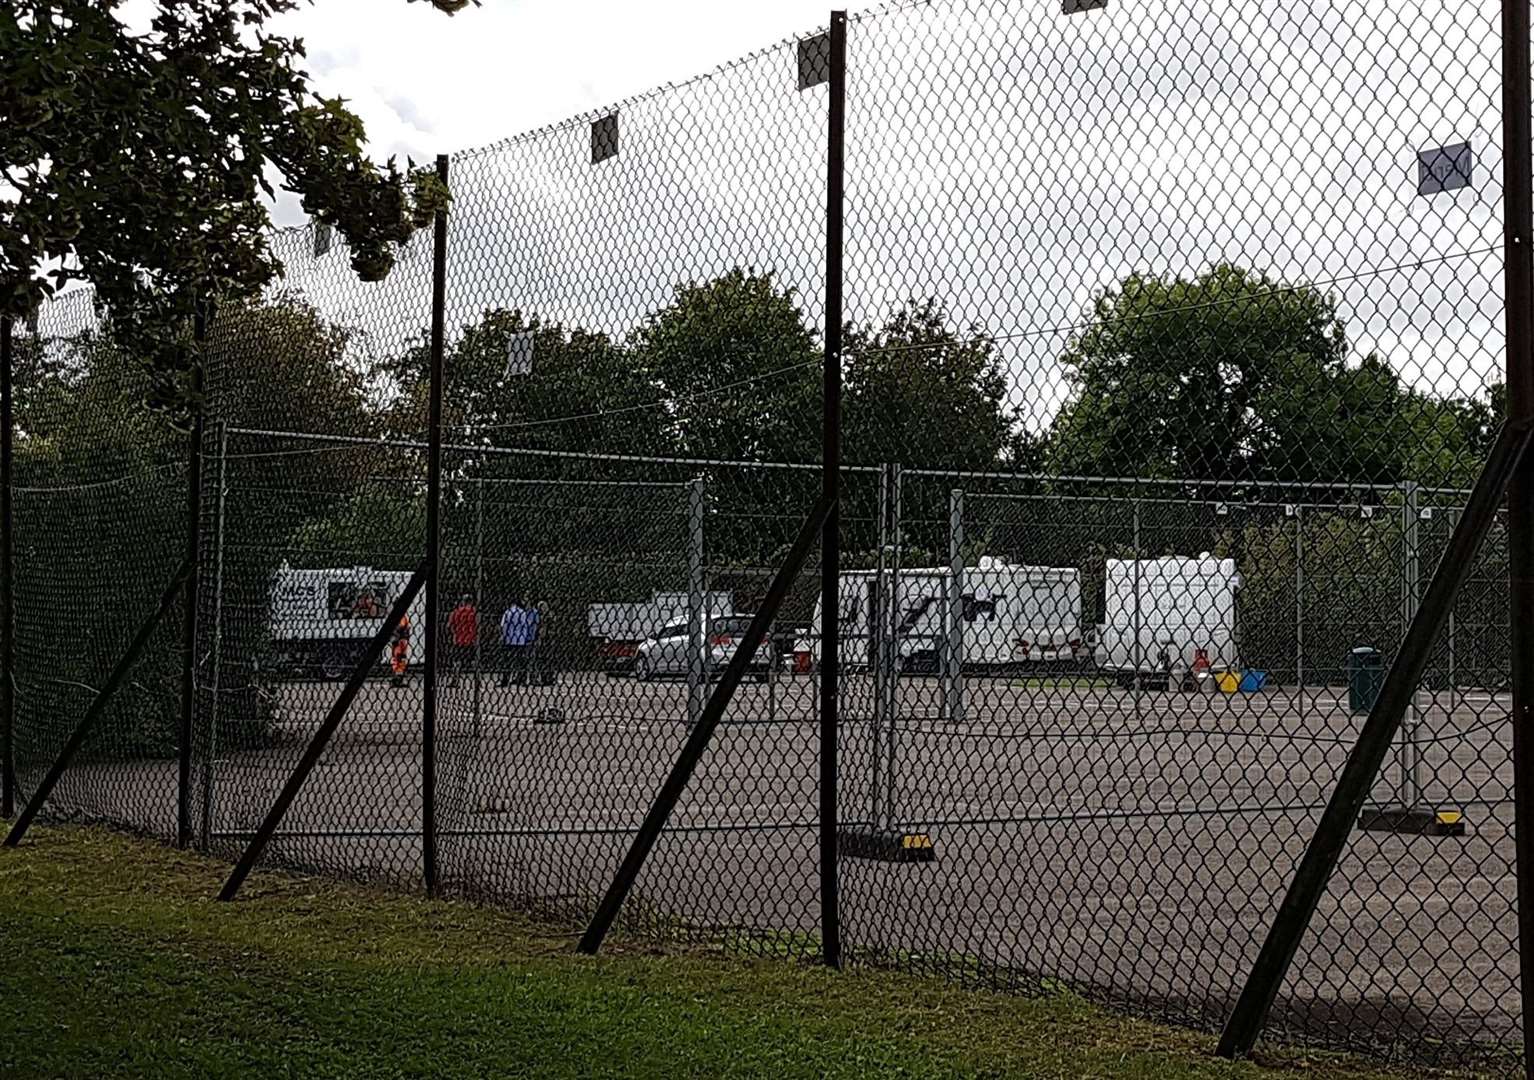 Travellers have moved onto a car park at St Anselm's in Canterbury